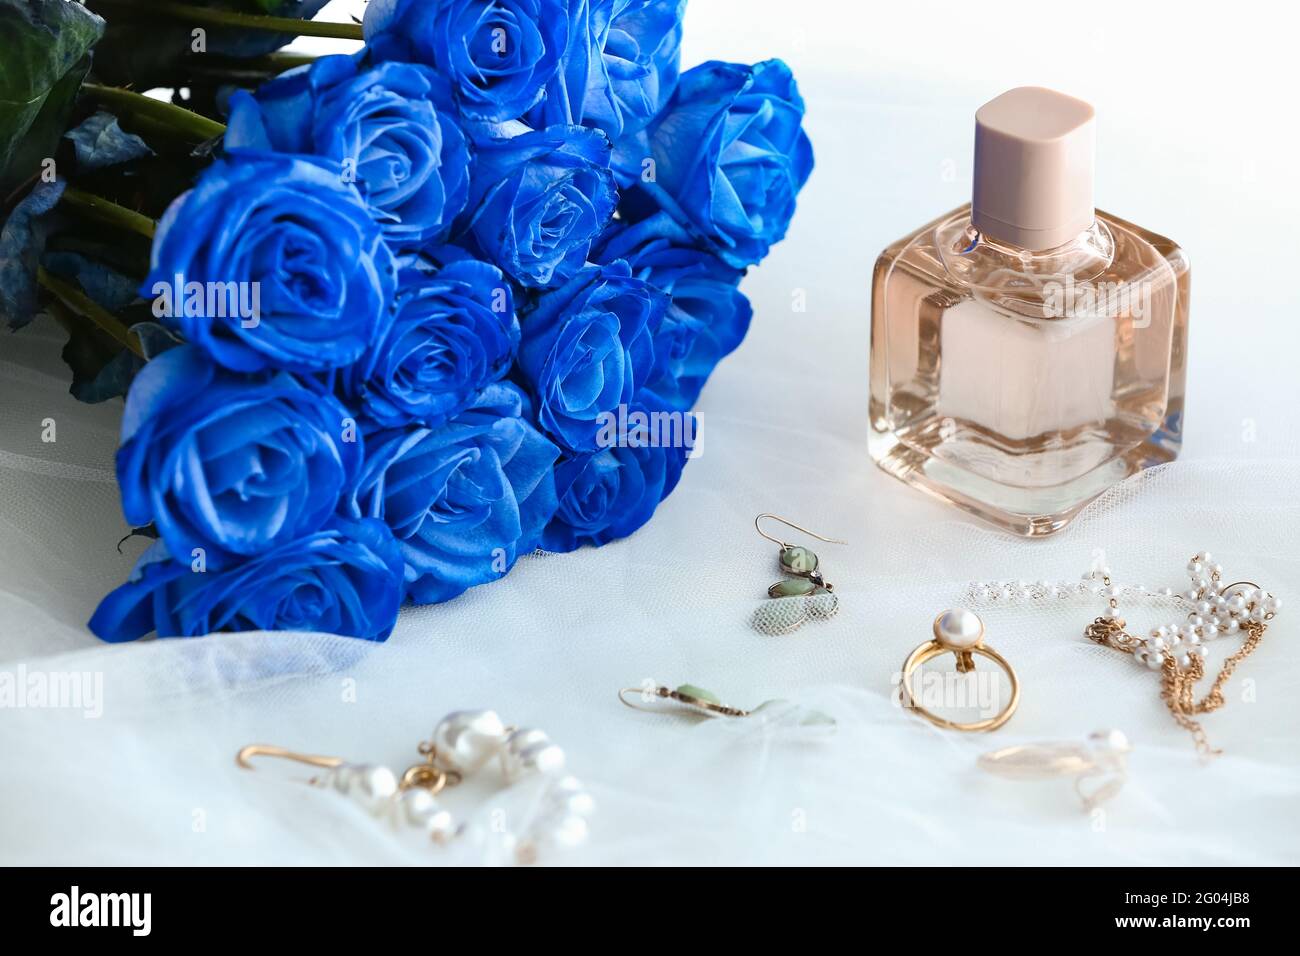 Beautiful blue roses, perfume and jewelry on light background Stock Photo -  Alamy